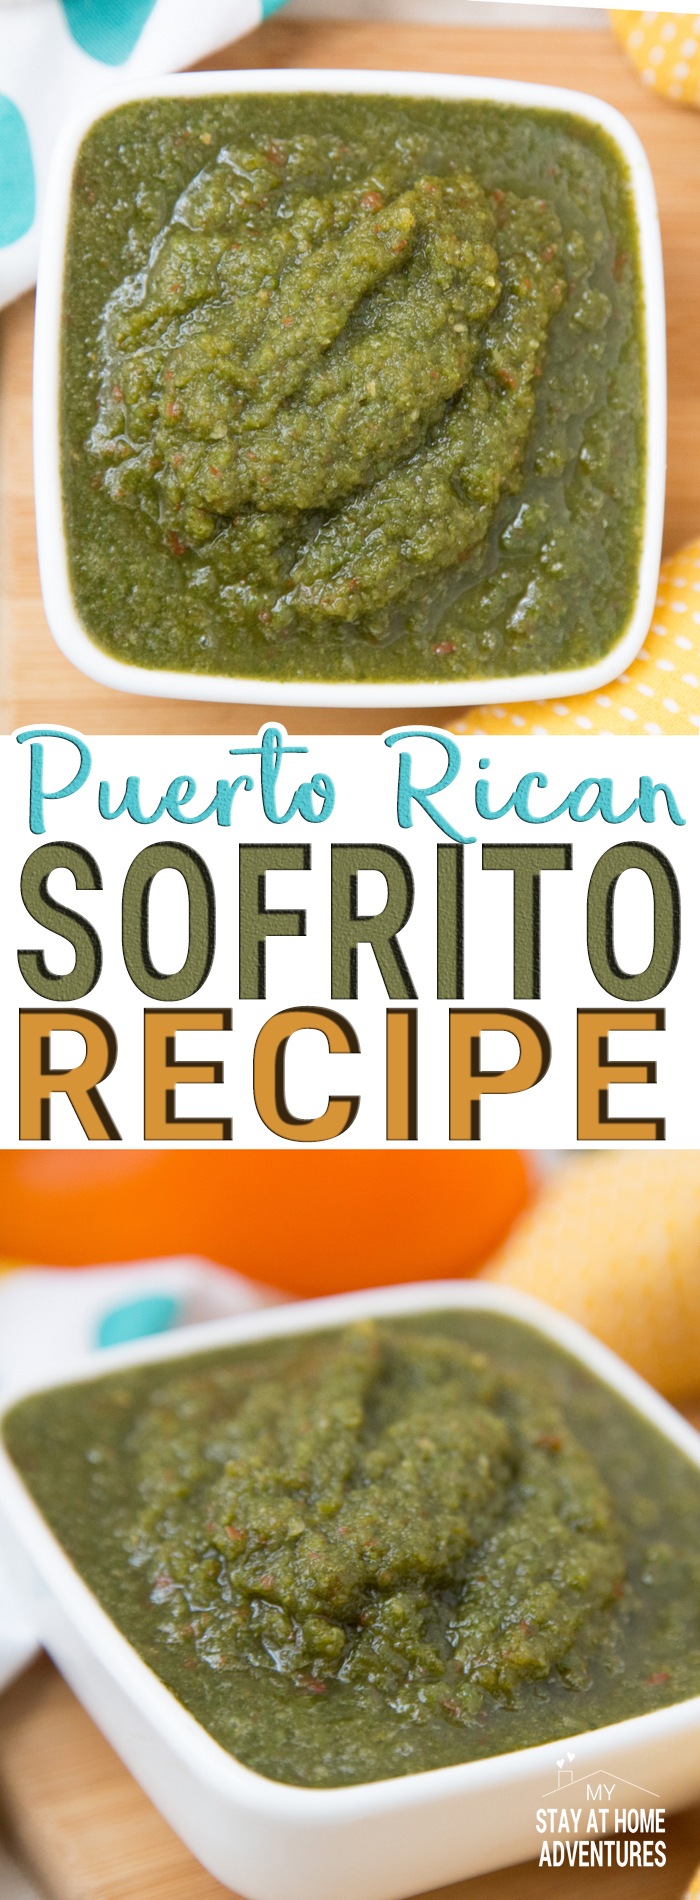 Puerto Rican Sofrito Recipe * My Stay At Home Adventures